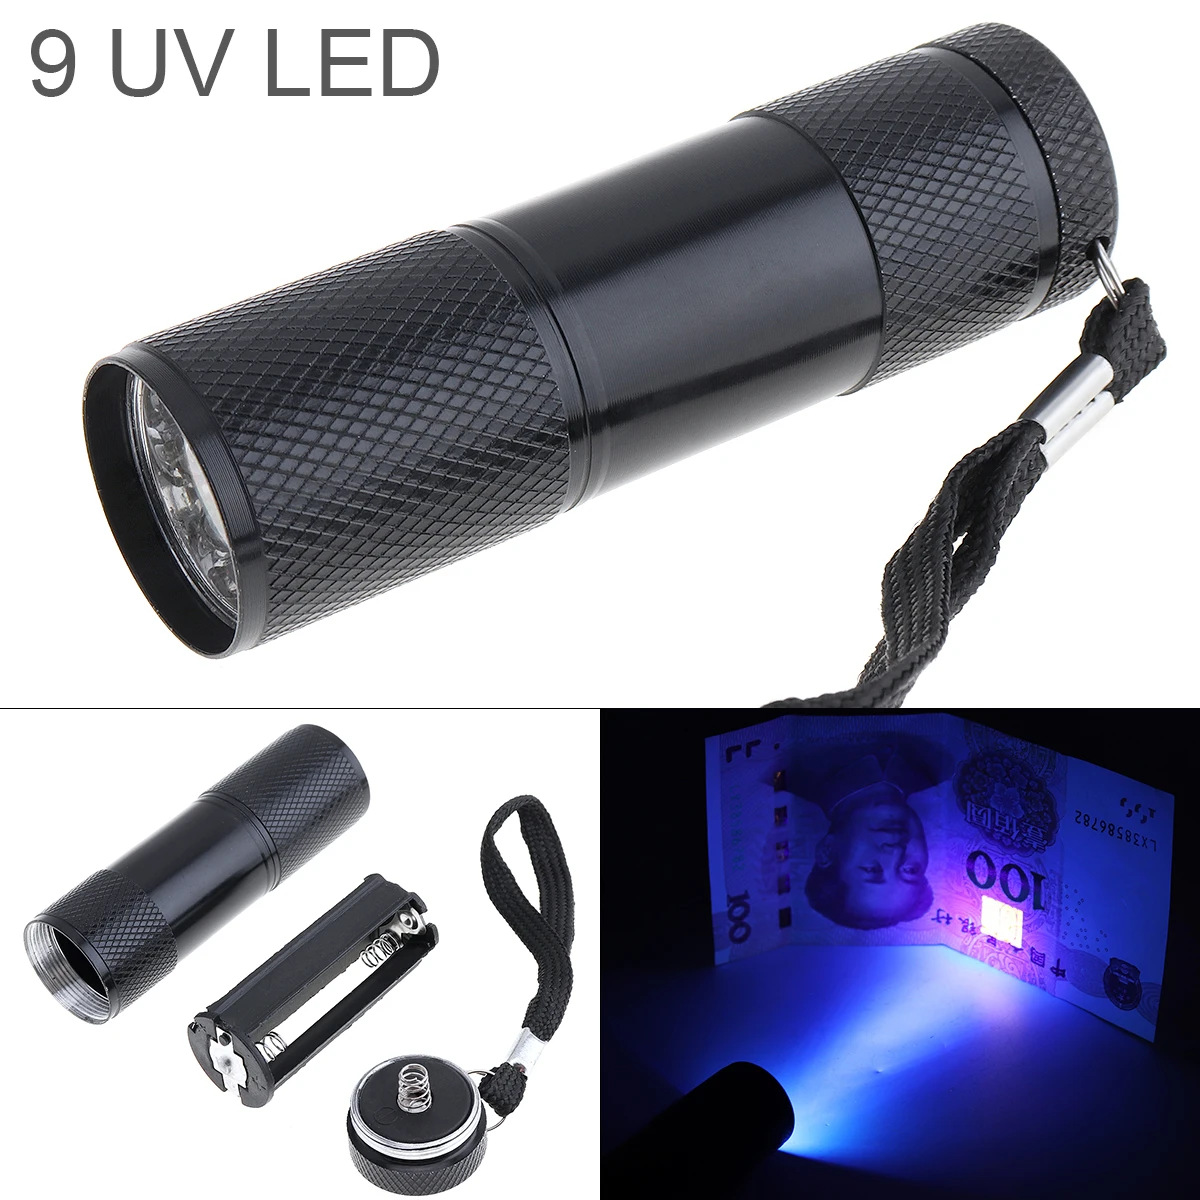 

395nm Aluminum Alloy 9 LED UV Multi-function Flashlight Support 3 x AAA Batteries for Fluorescent Agent Detection